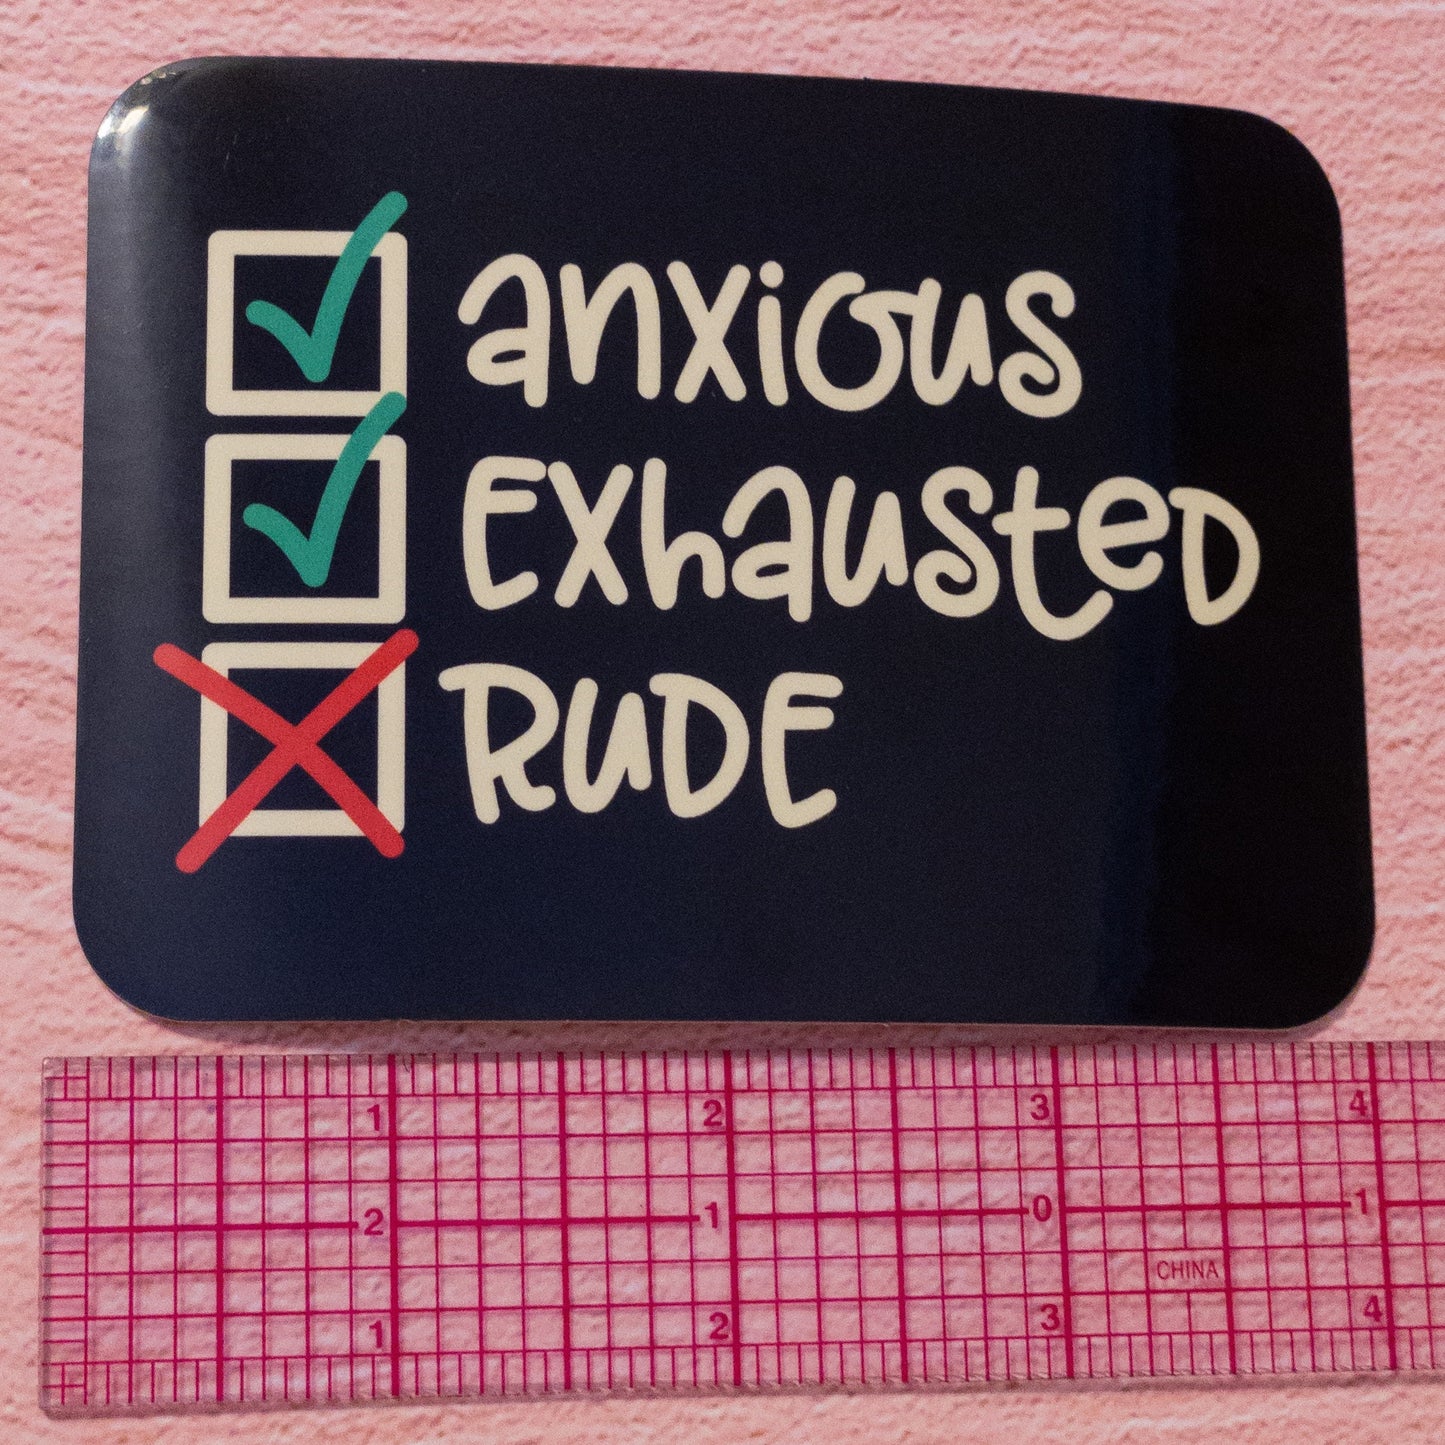 Anxious and Exhausted But Not Rude Vinyl Sticker 4 inch